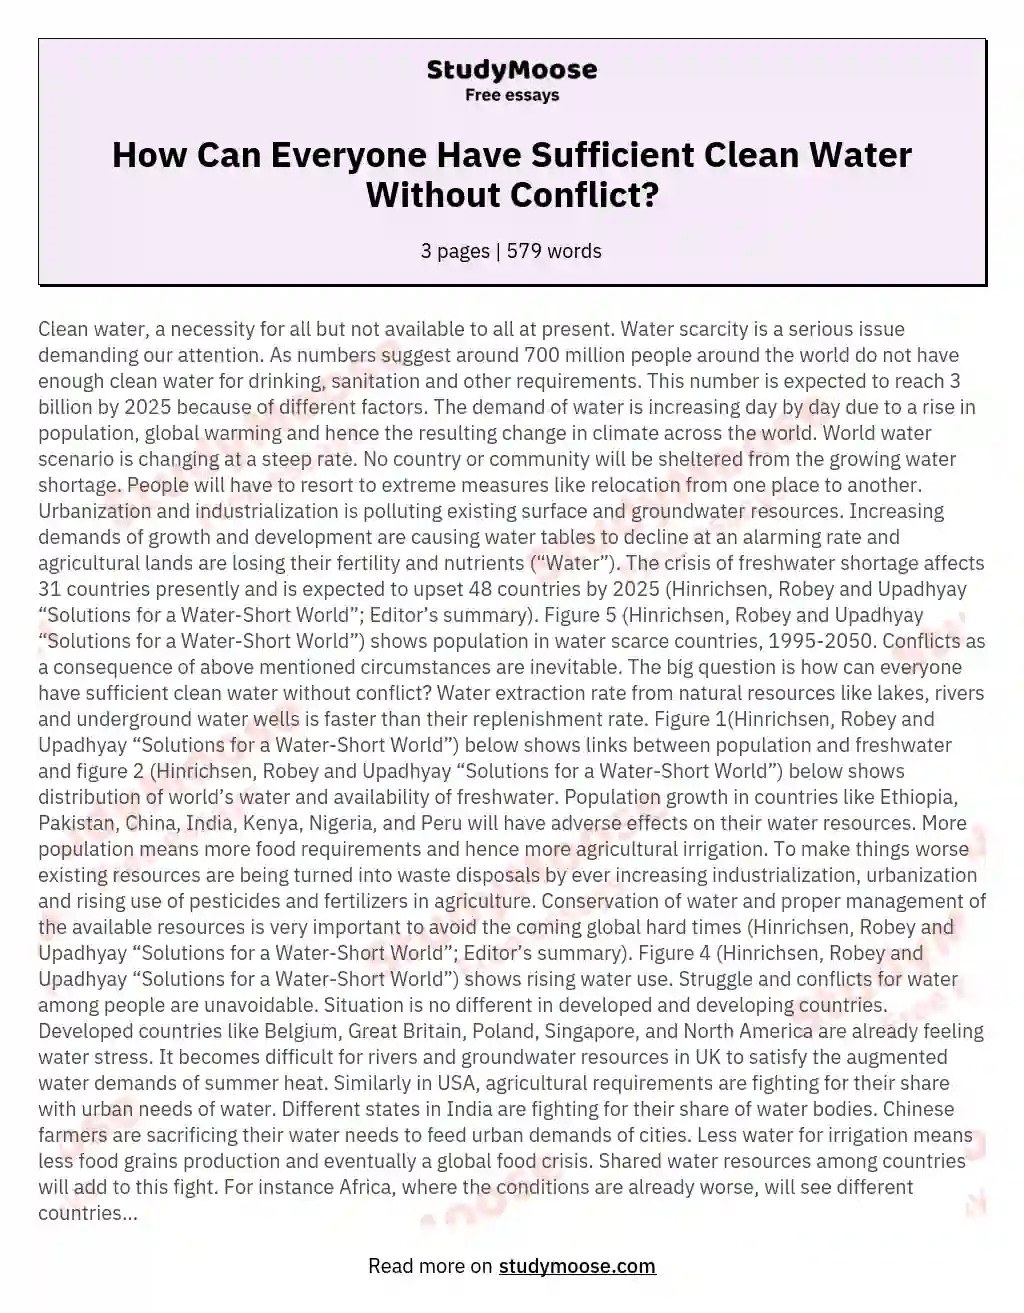 How Can Everyone Have Sufficient Clean Water Without Conflict? essay